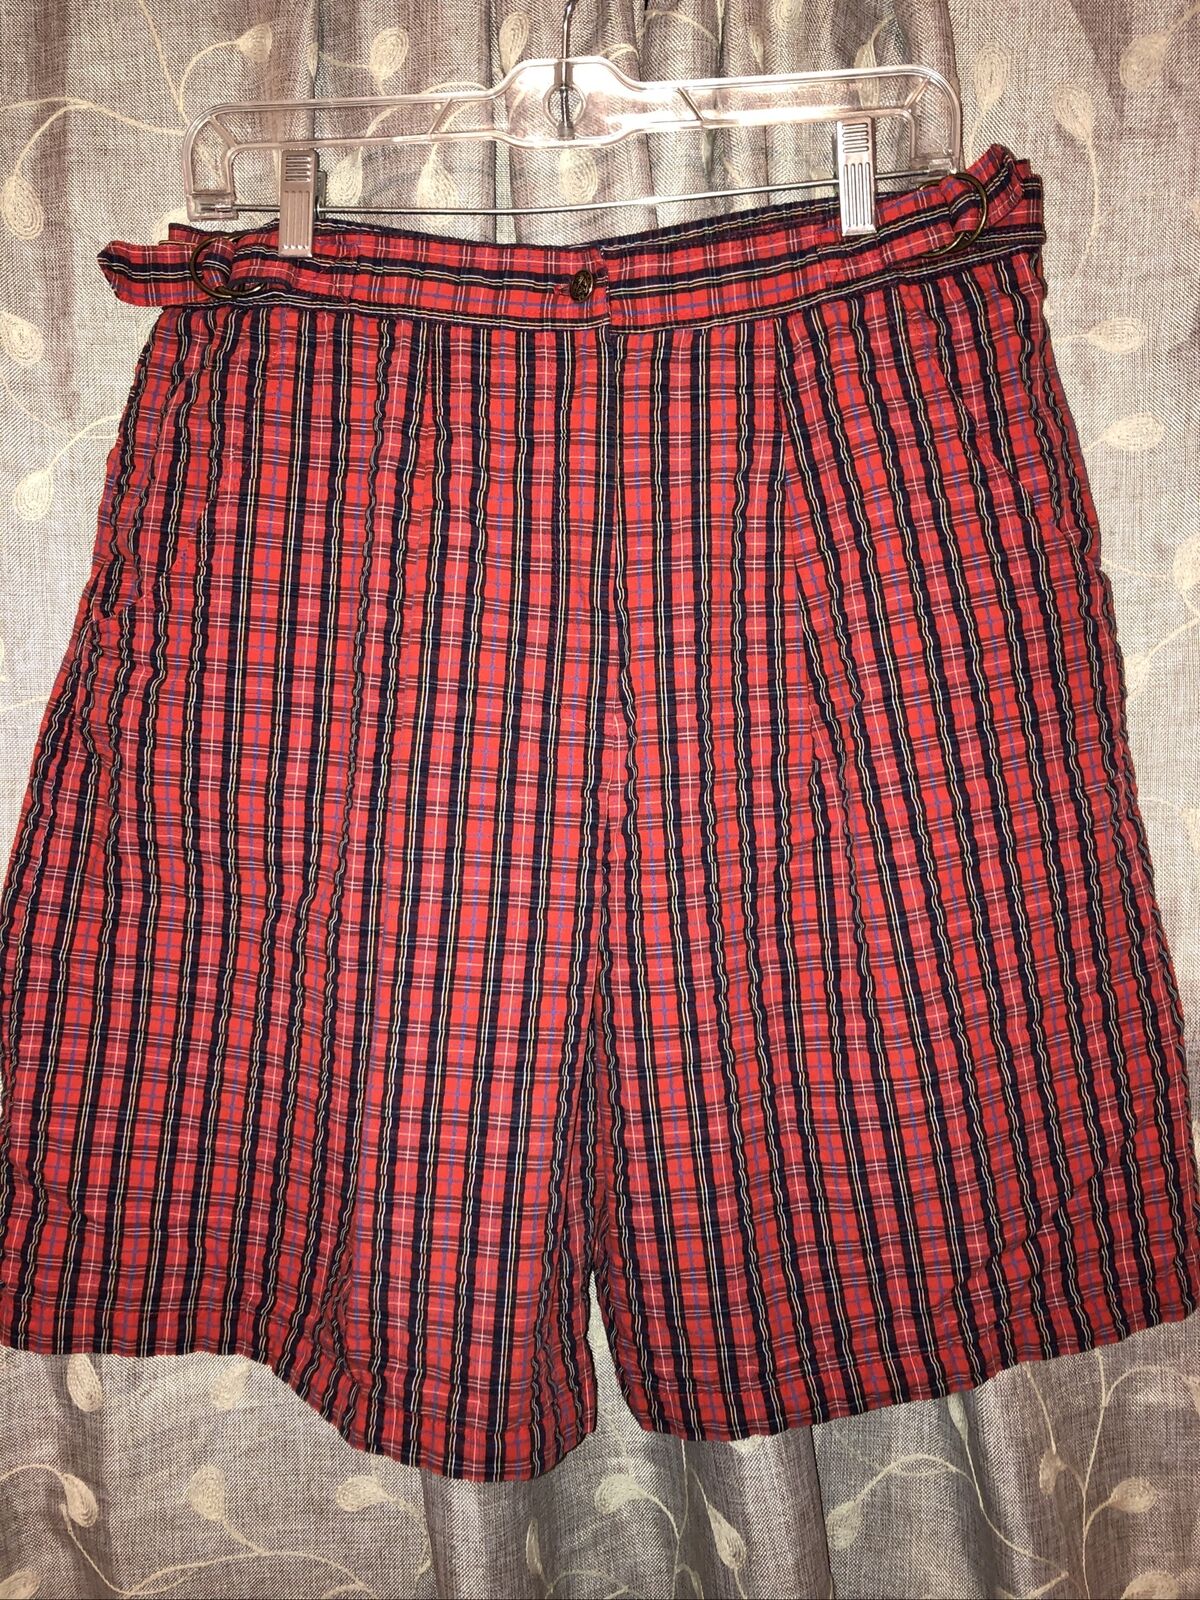 Vintage Chaus Size 16 Red Plaid Shorts Women Ladies Pleated Front